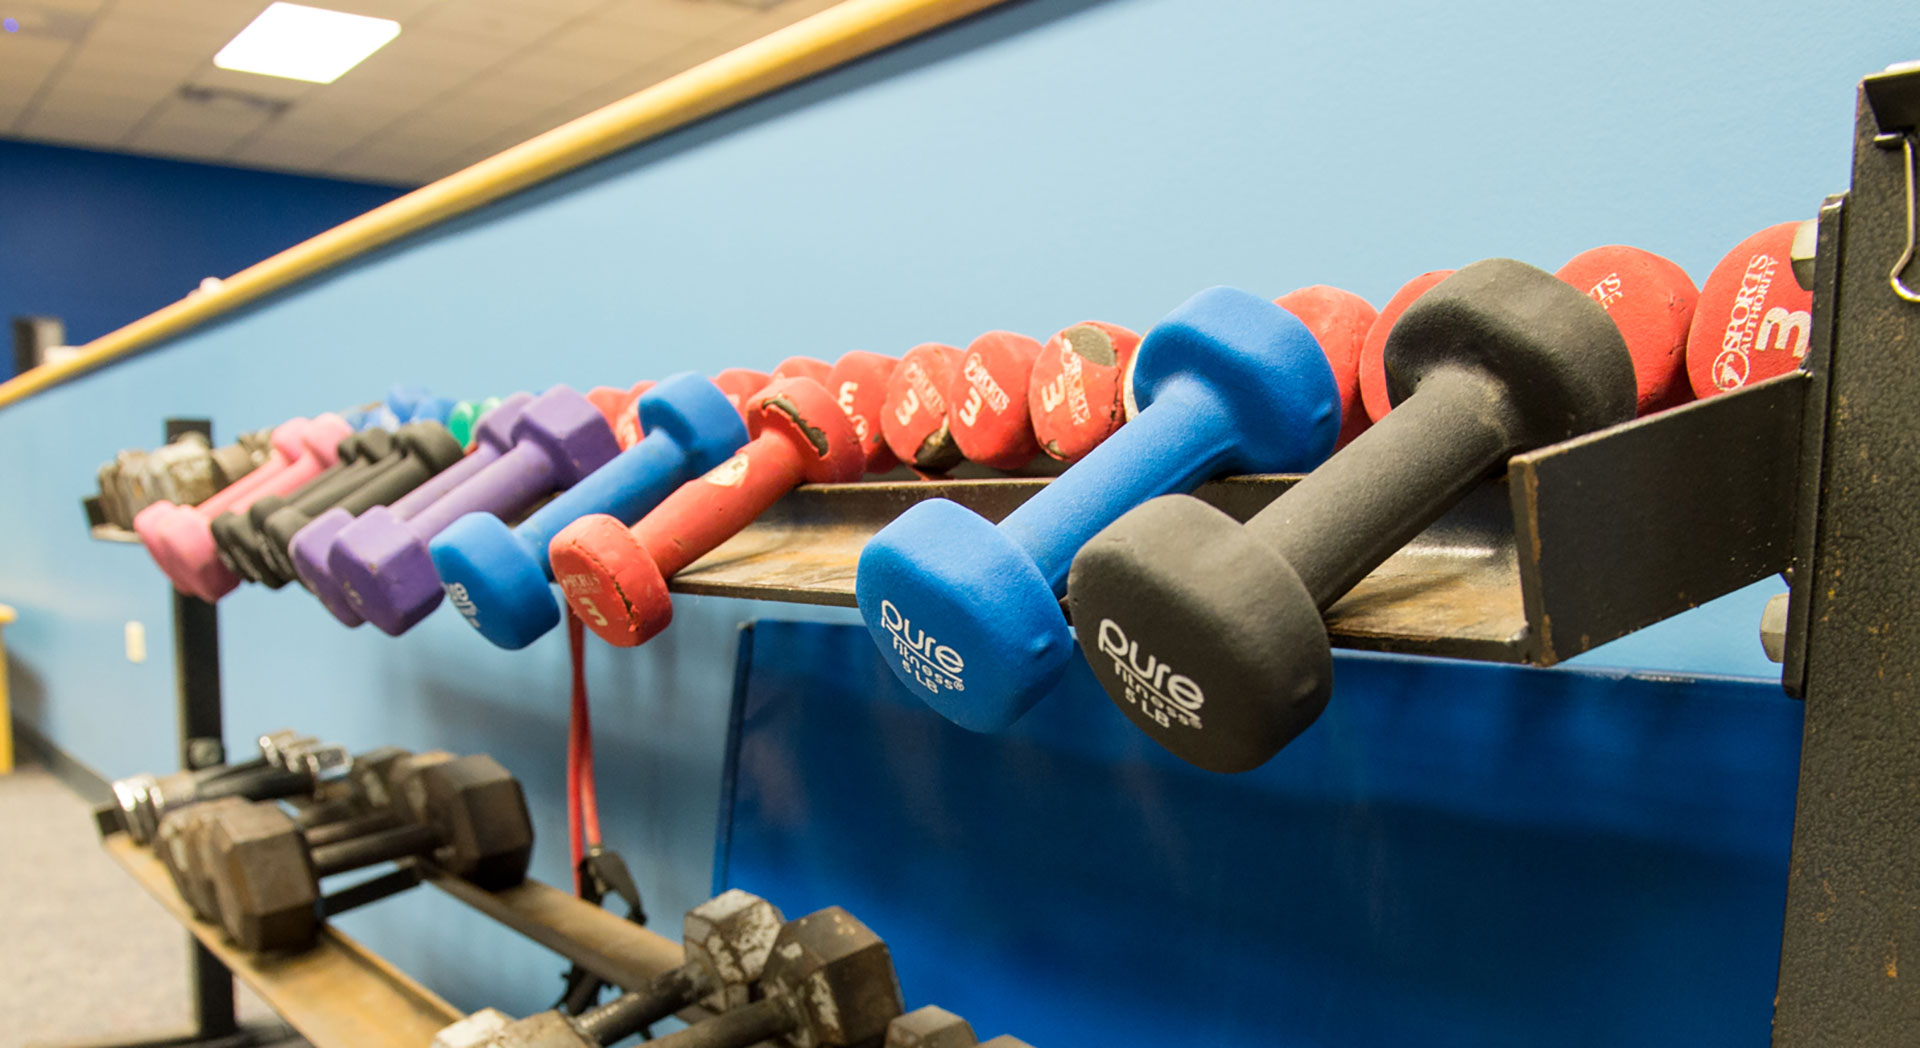 Row of differently colored hand weights in gym.